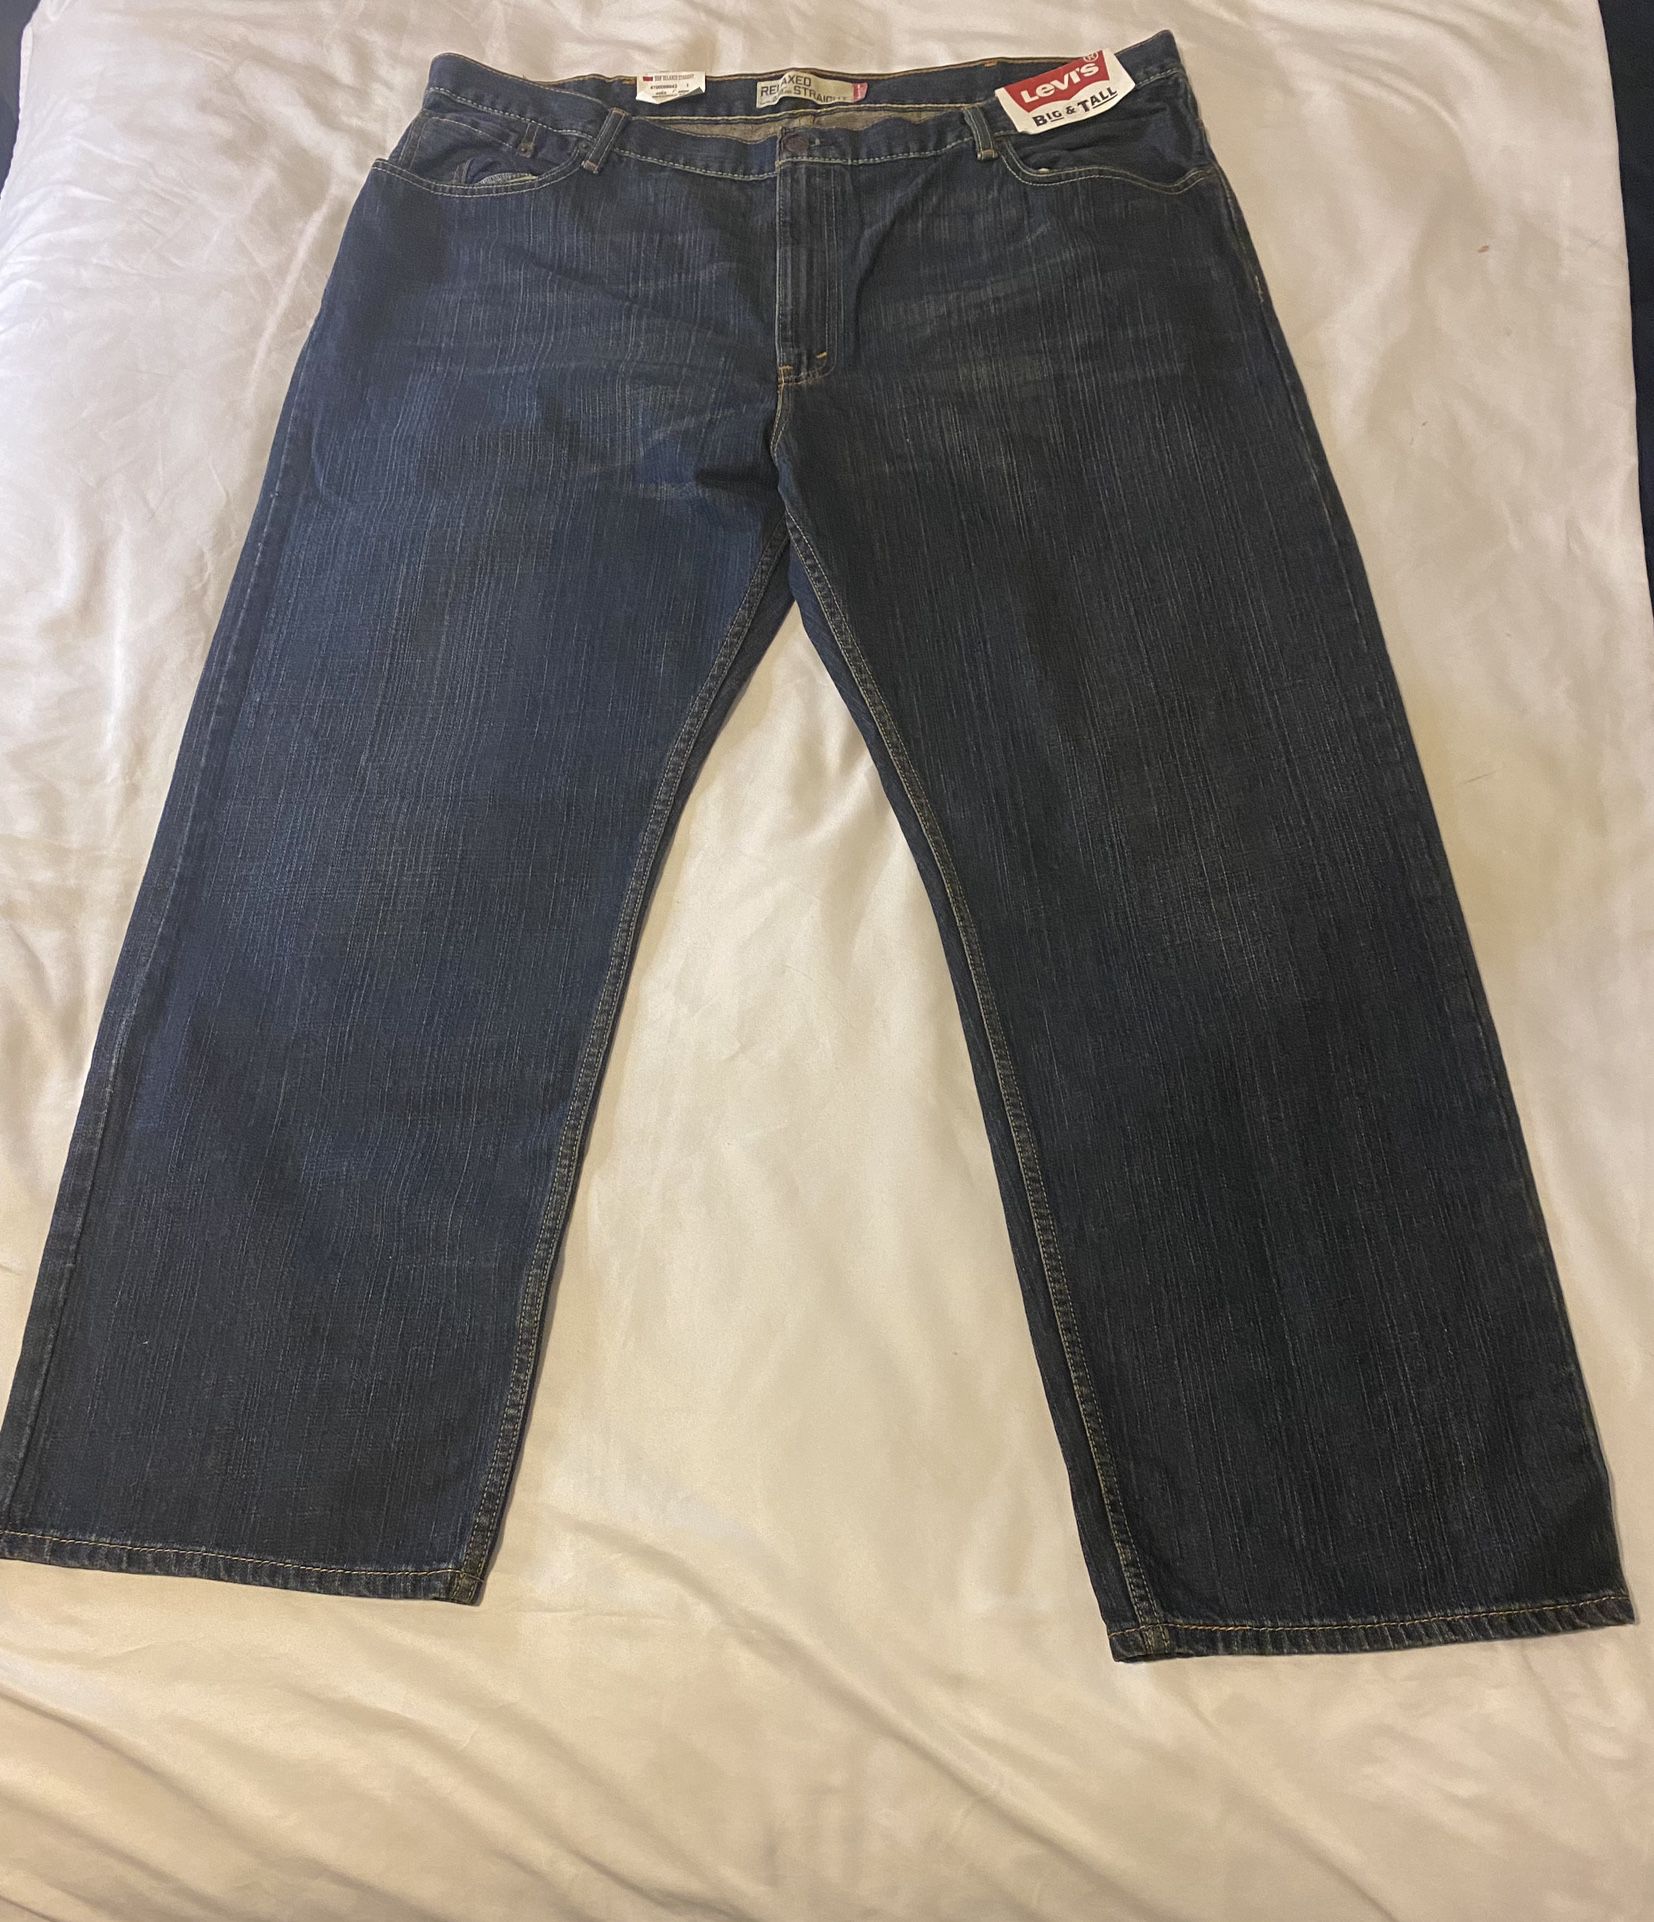 Levi’s Mens Big & Tall  559 Relaxed Straight Jeans. size, W44 X L30